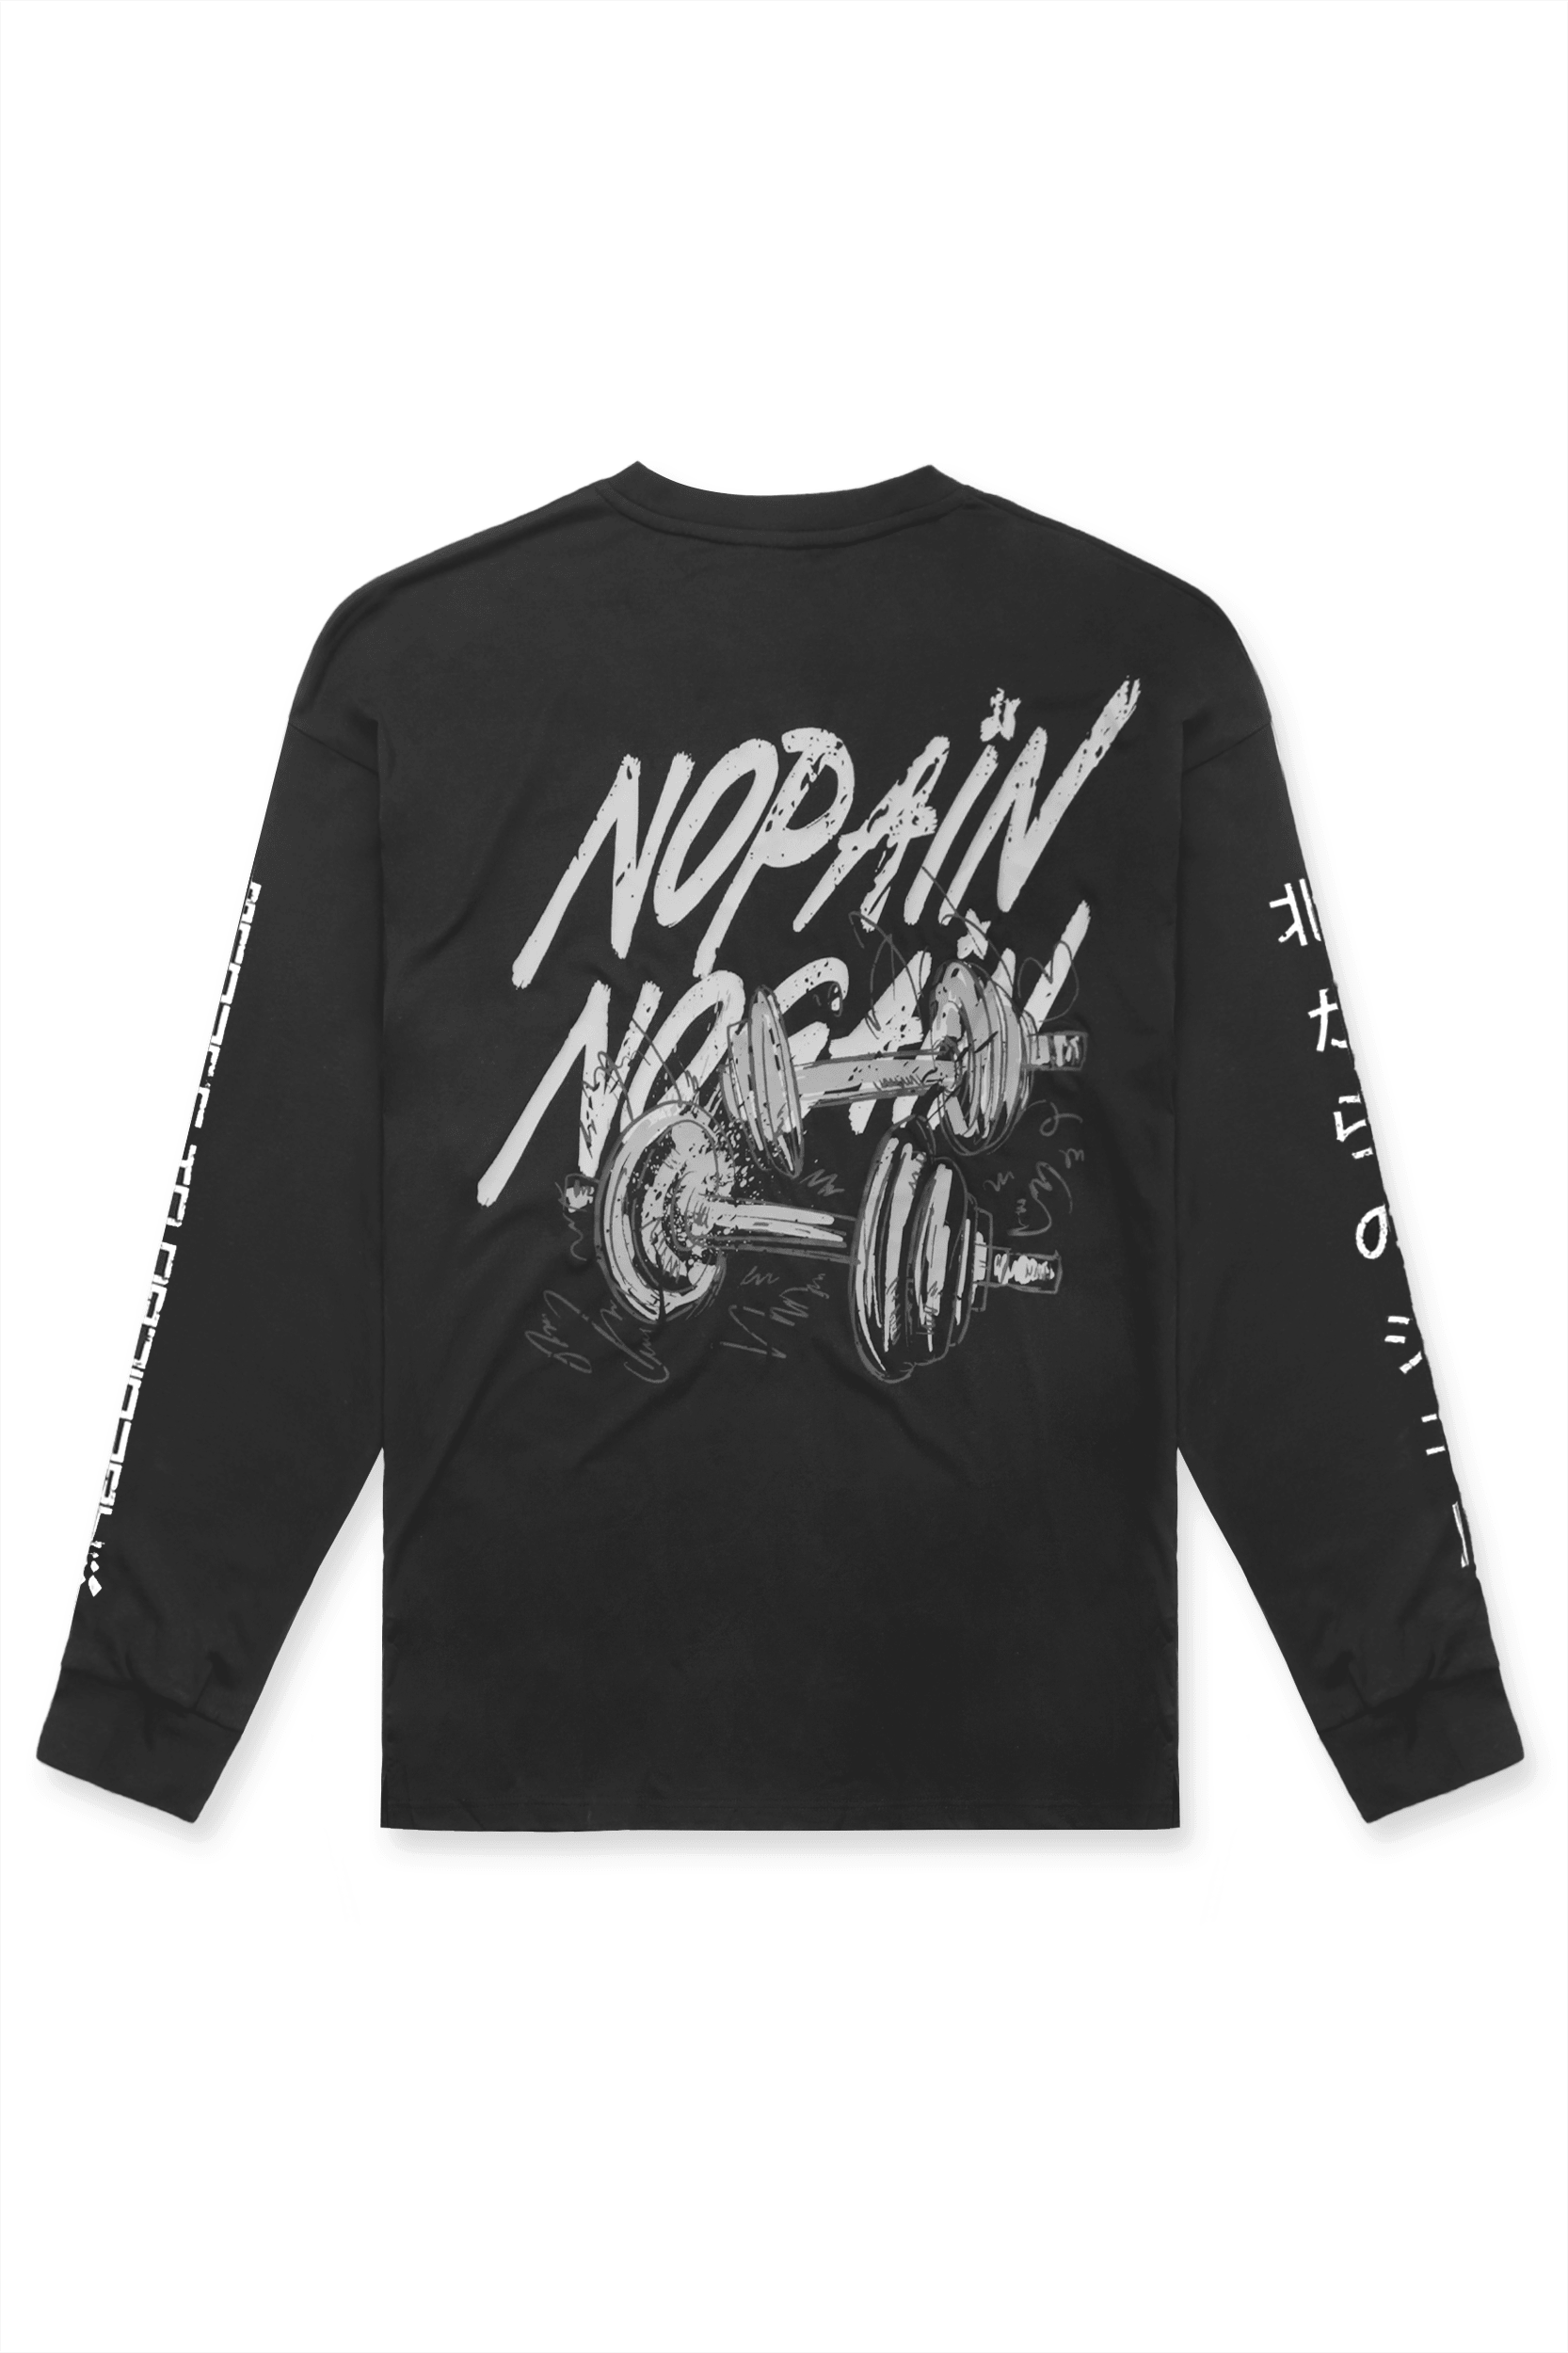 Energy Oversized Long Sleeve T-Shirt - No Pain No Gain - Jed North